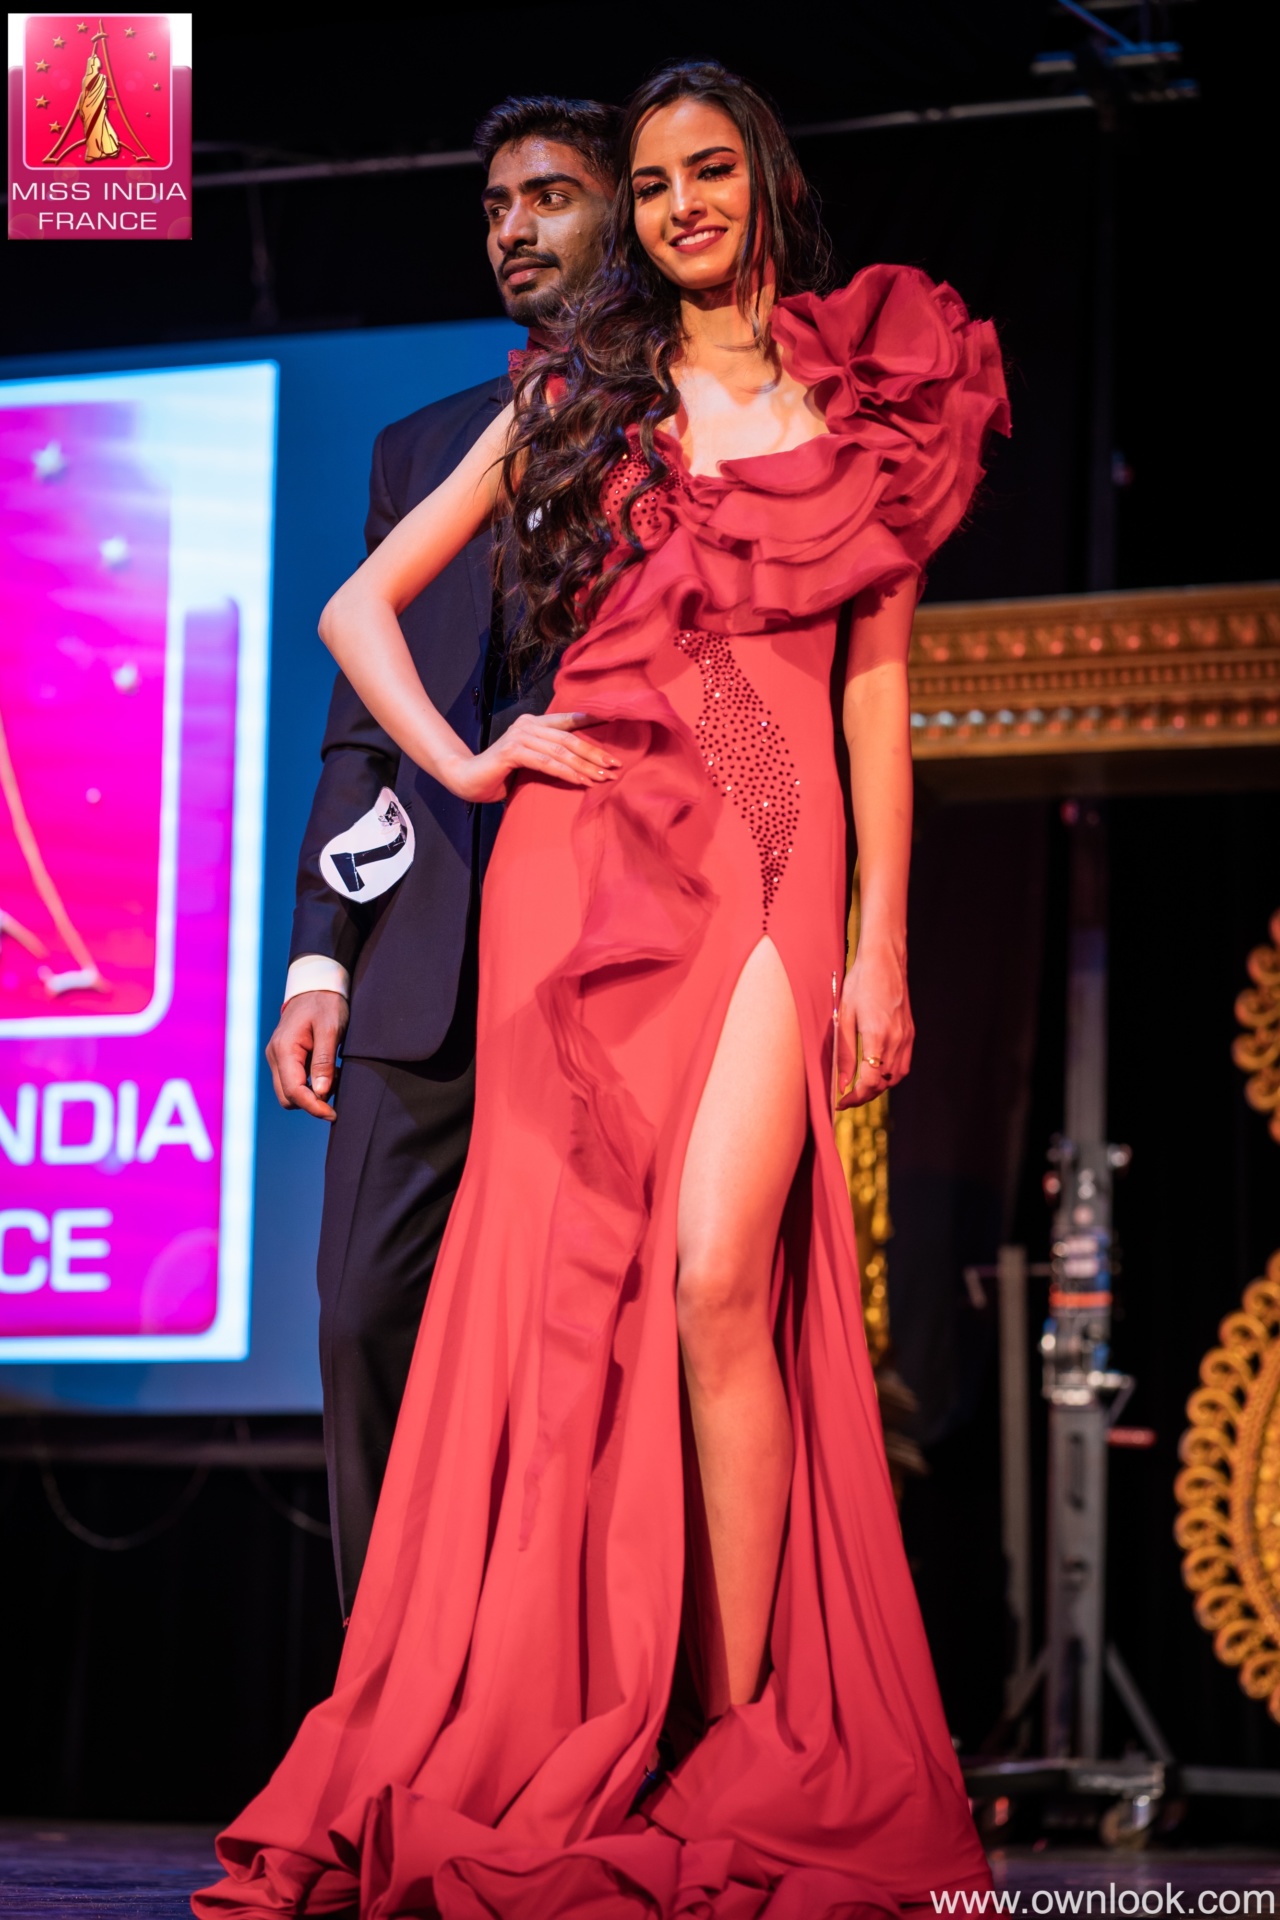 Miss India France 2020